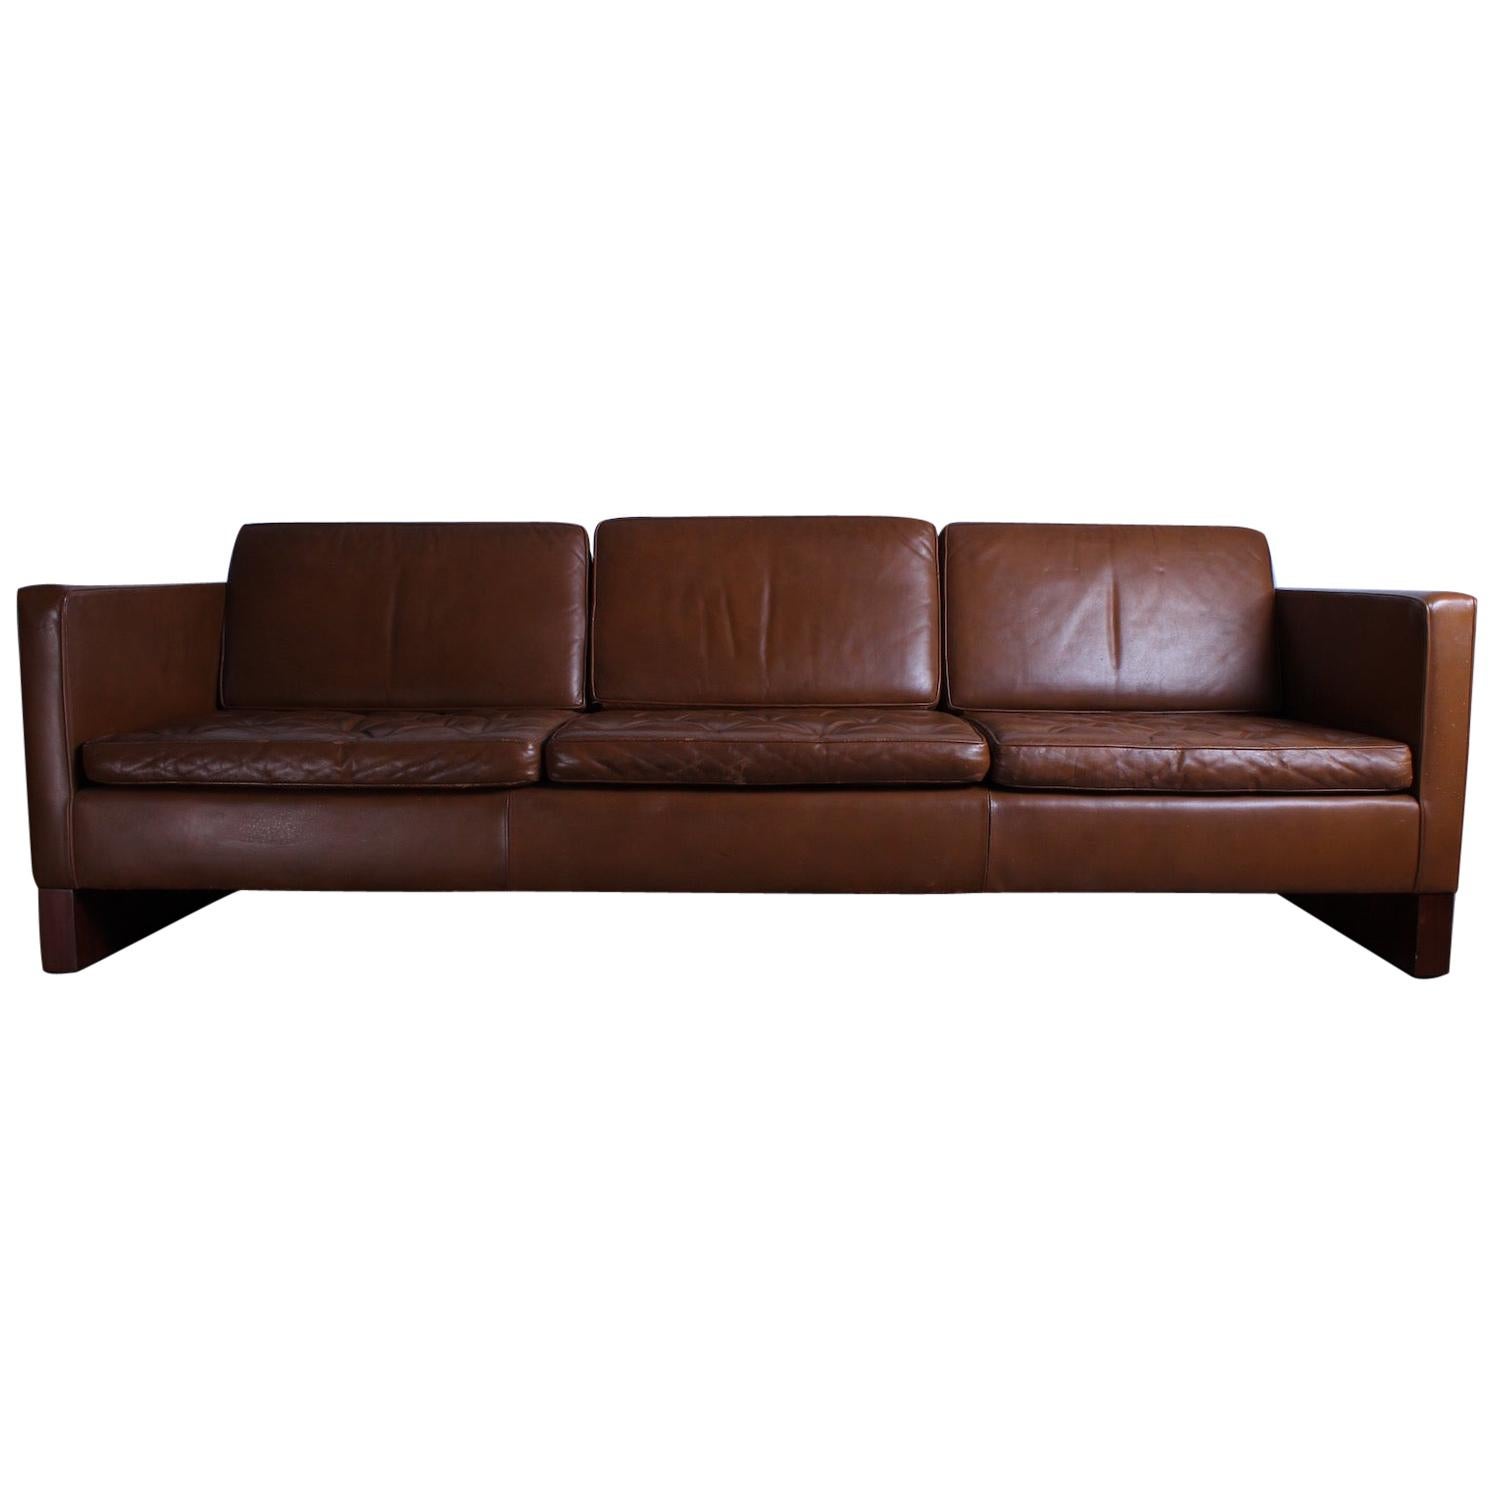 Leather Sofa Designed by Mies van der Rohe for Knoll